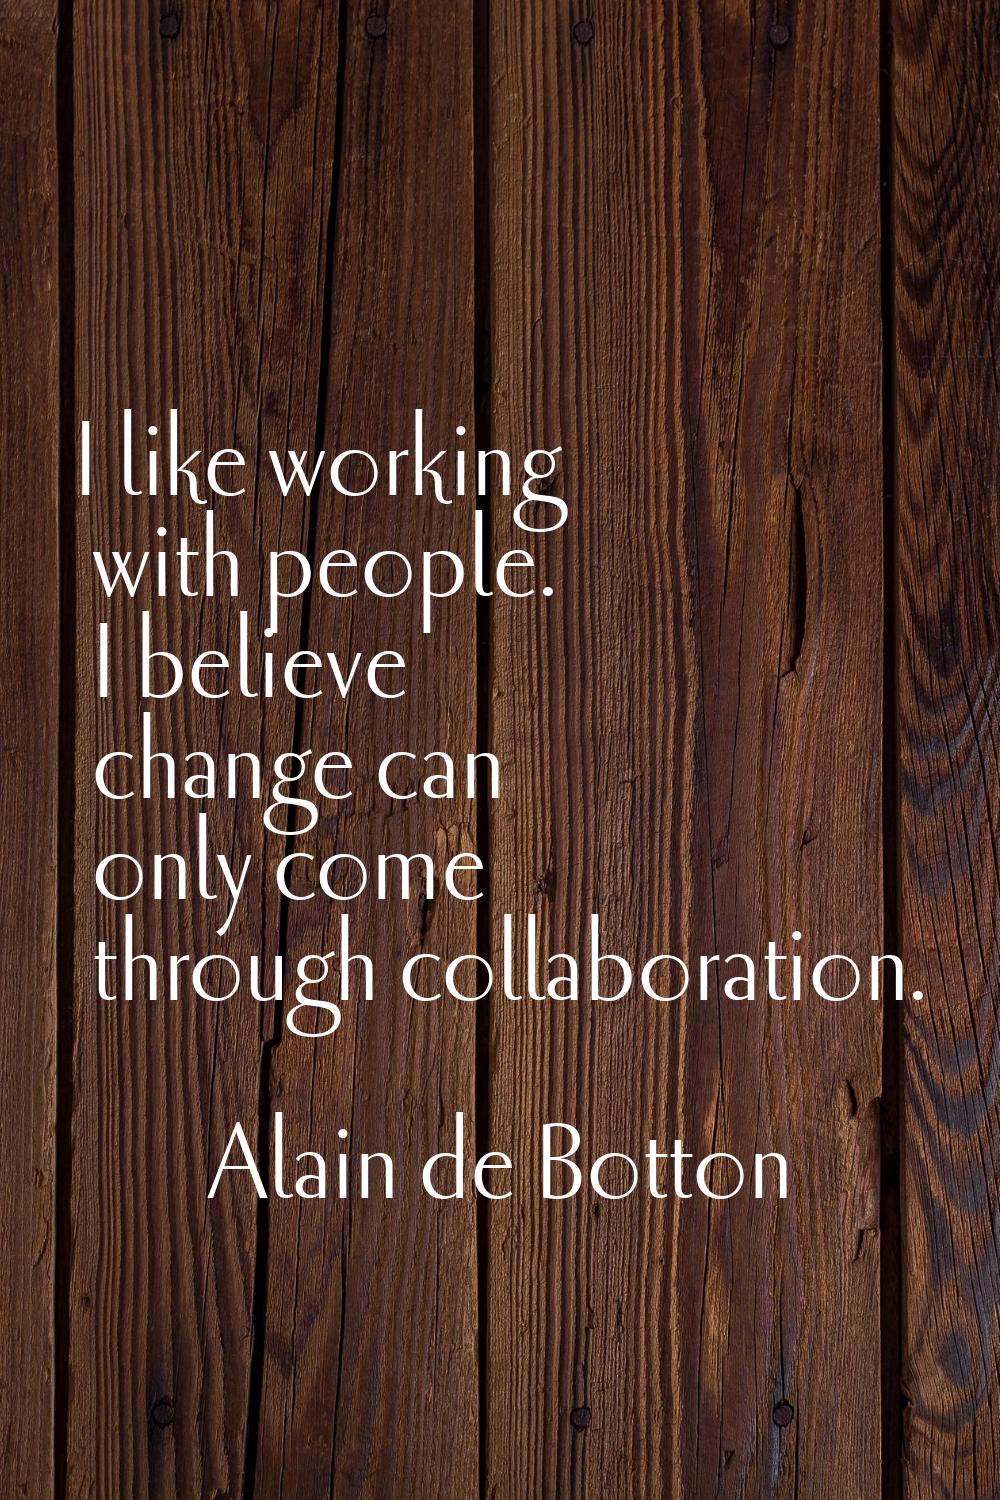 I like working with people. I believe change can only come through collaboration.